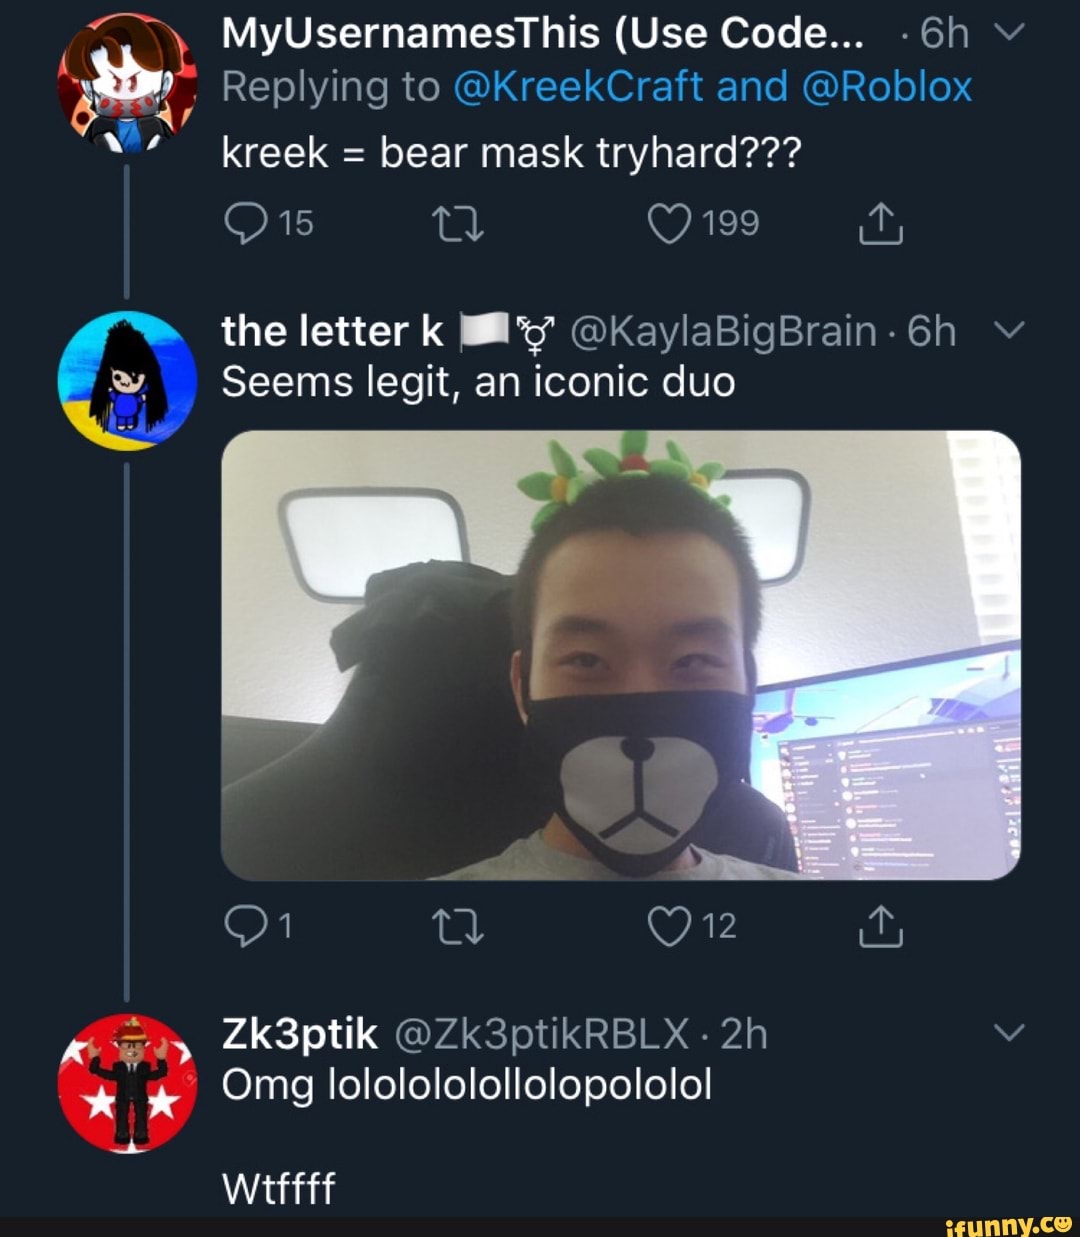 Myusernamesthis Use Code 6h Replying To Kreekcraft And Roblox Kreek Bear Mask Tryhard The Letter K By Okaylabigbrain 6h Y Seems Legit An Iconic Duo Omg Lololololollolopololo Ifunny - kreekcraft roblox codes